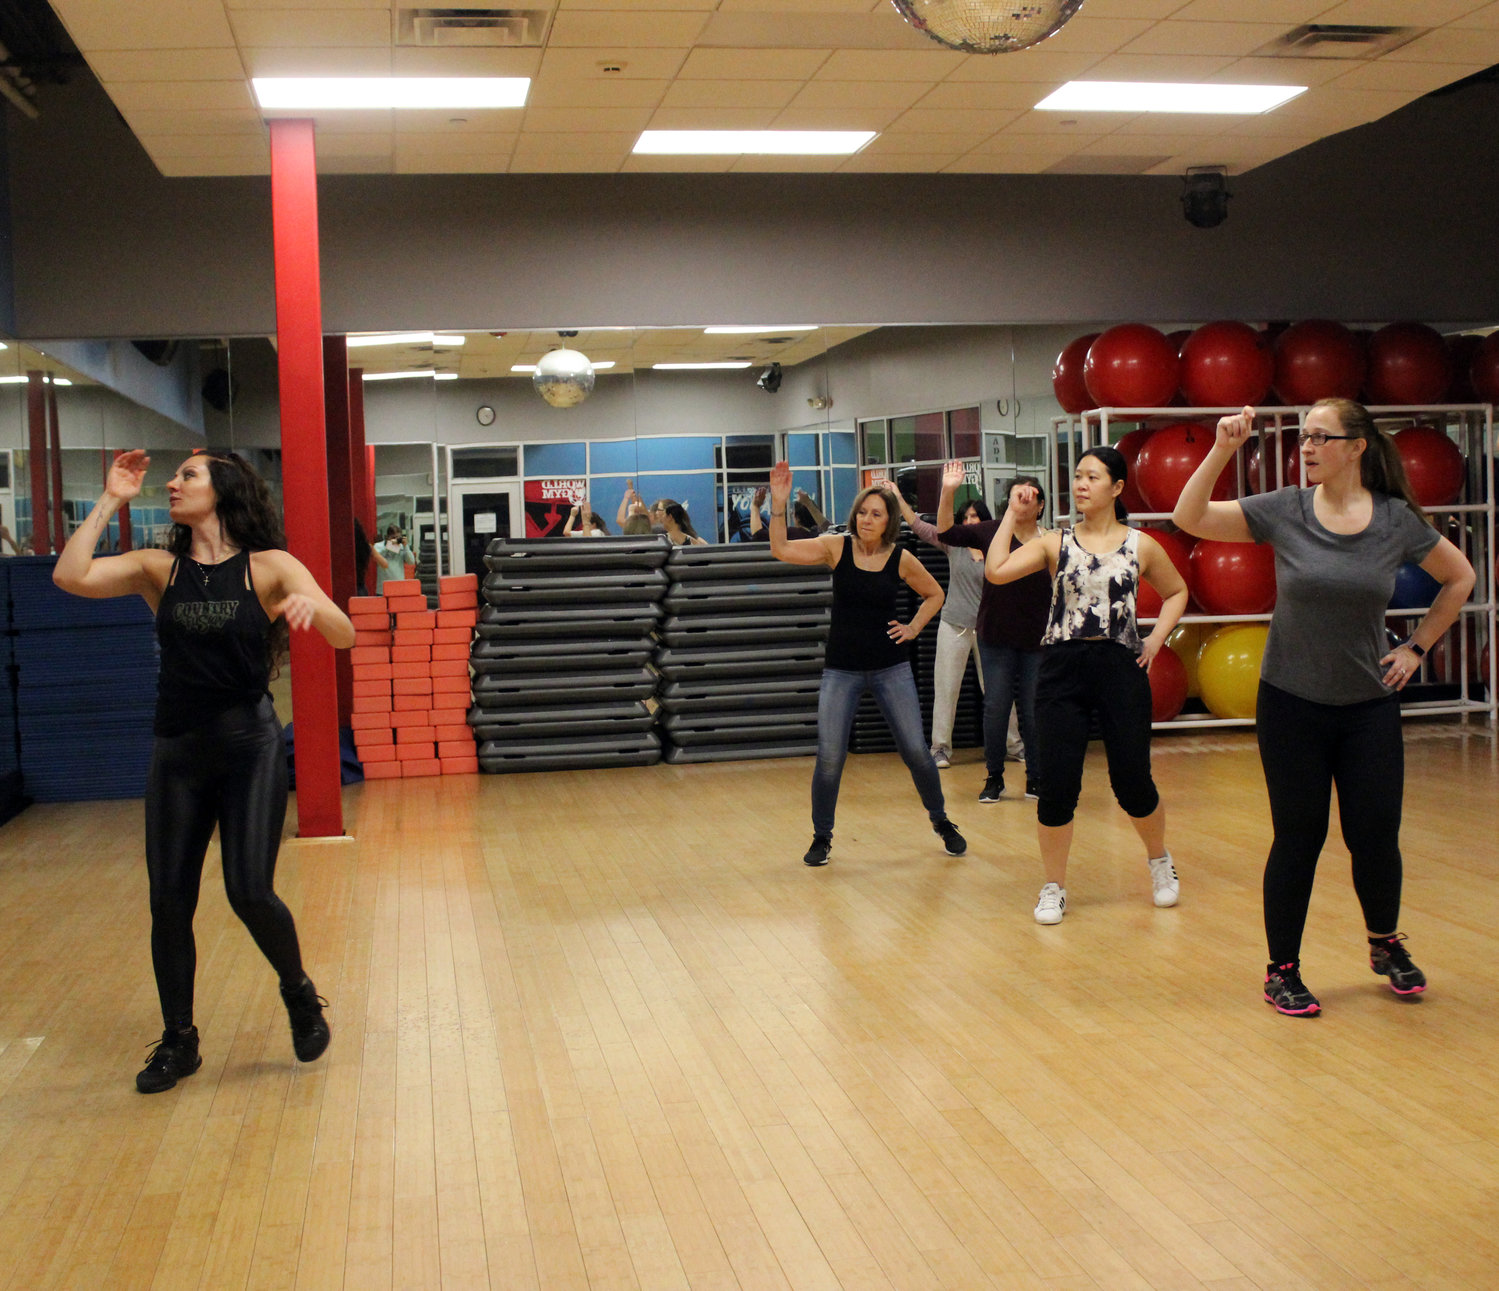 Sweating up a good time: Jazzercise promotes being healthy while